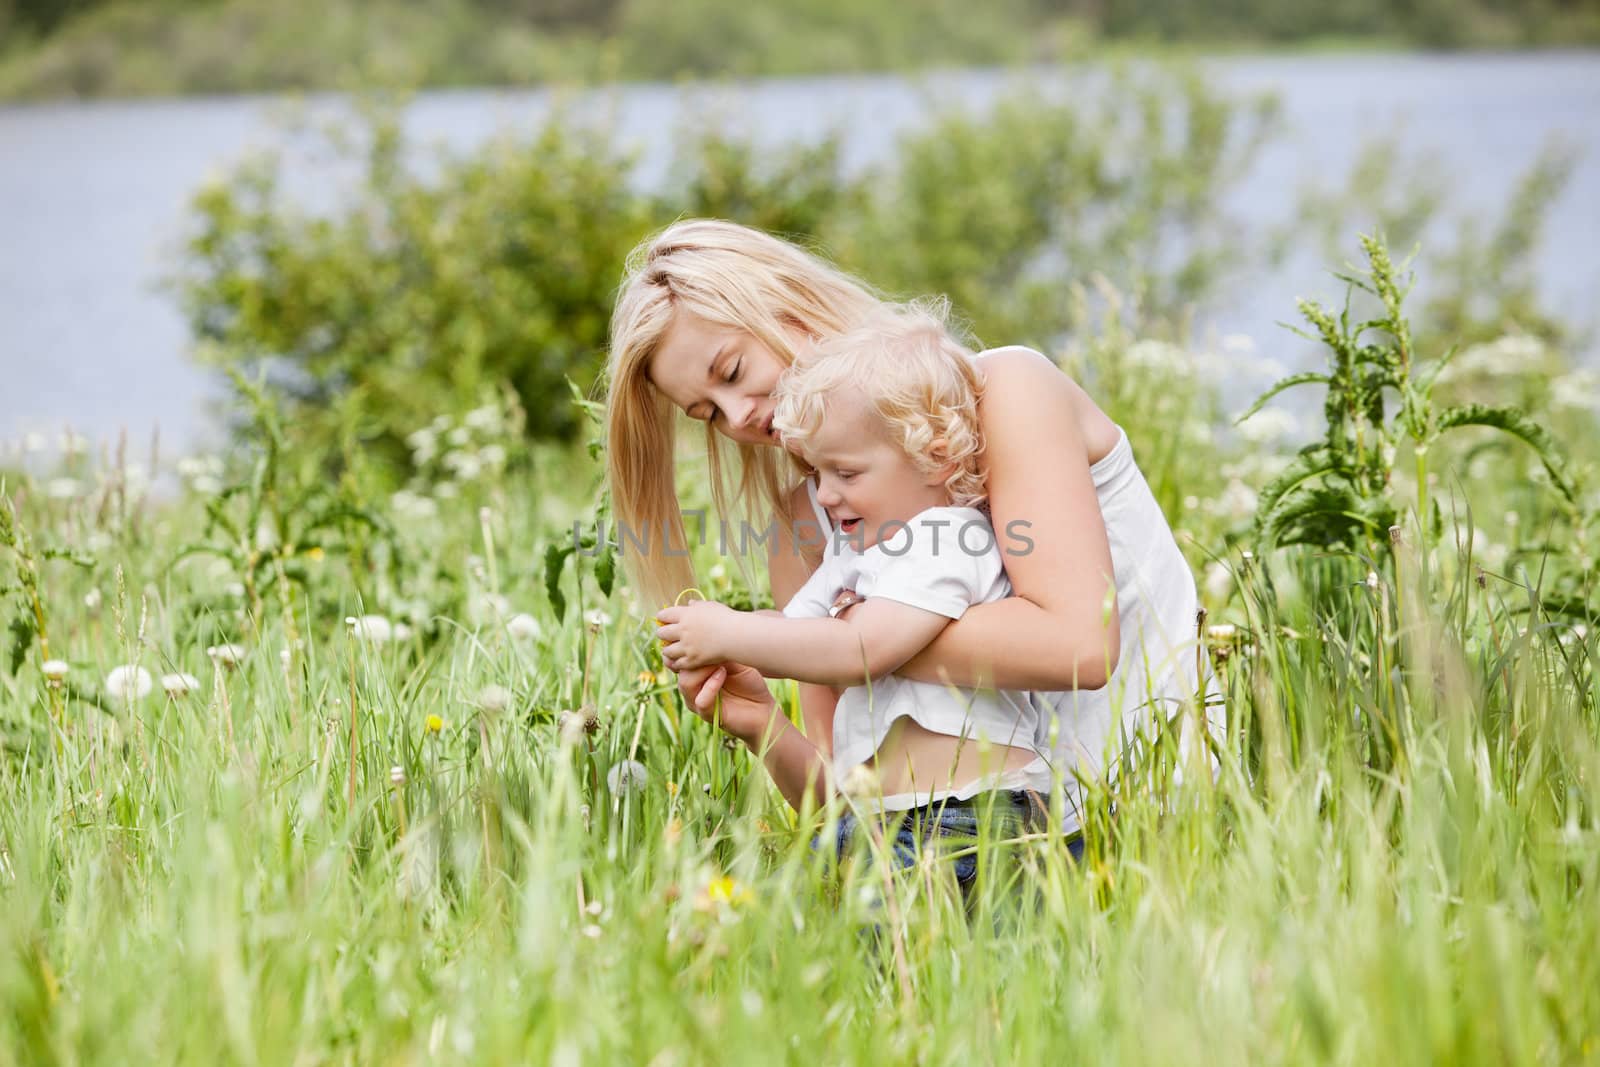 Mother and child in grass by leaf